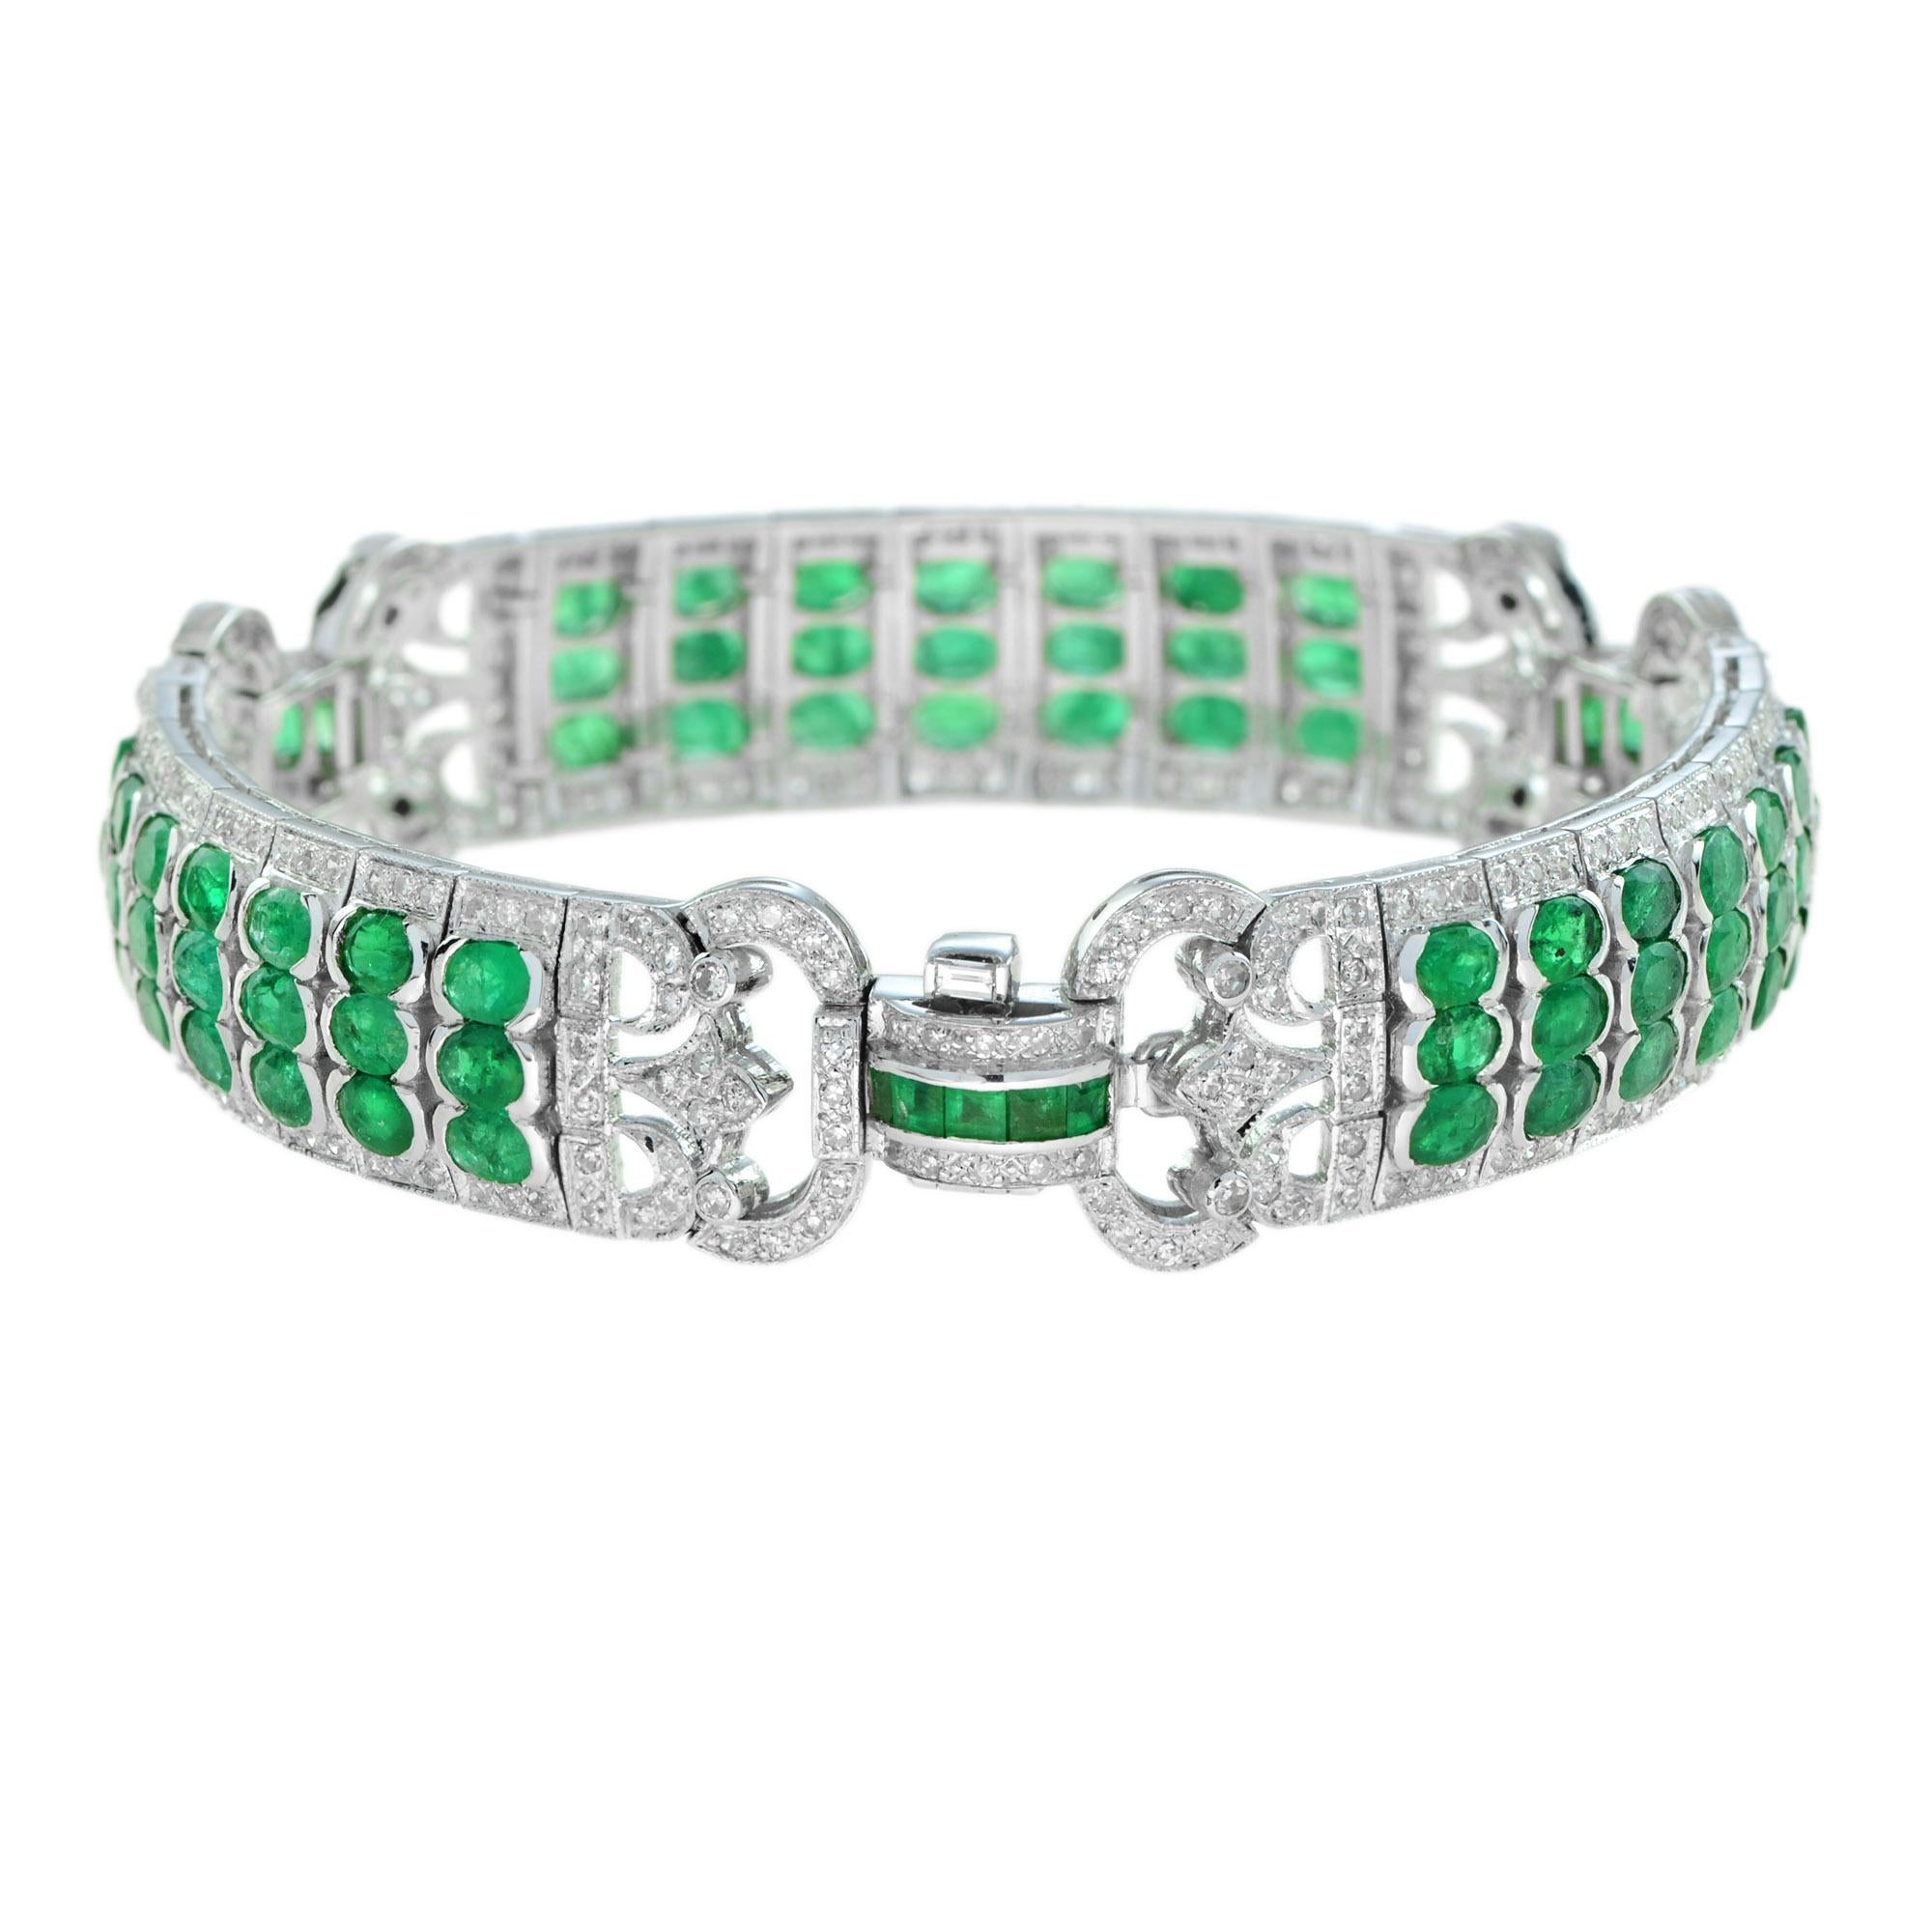 Oval Cut Art Deco Style 12.89 Ct. Emerald and Diamond Link Bracelet in 18K White Gold